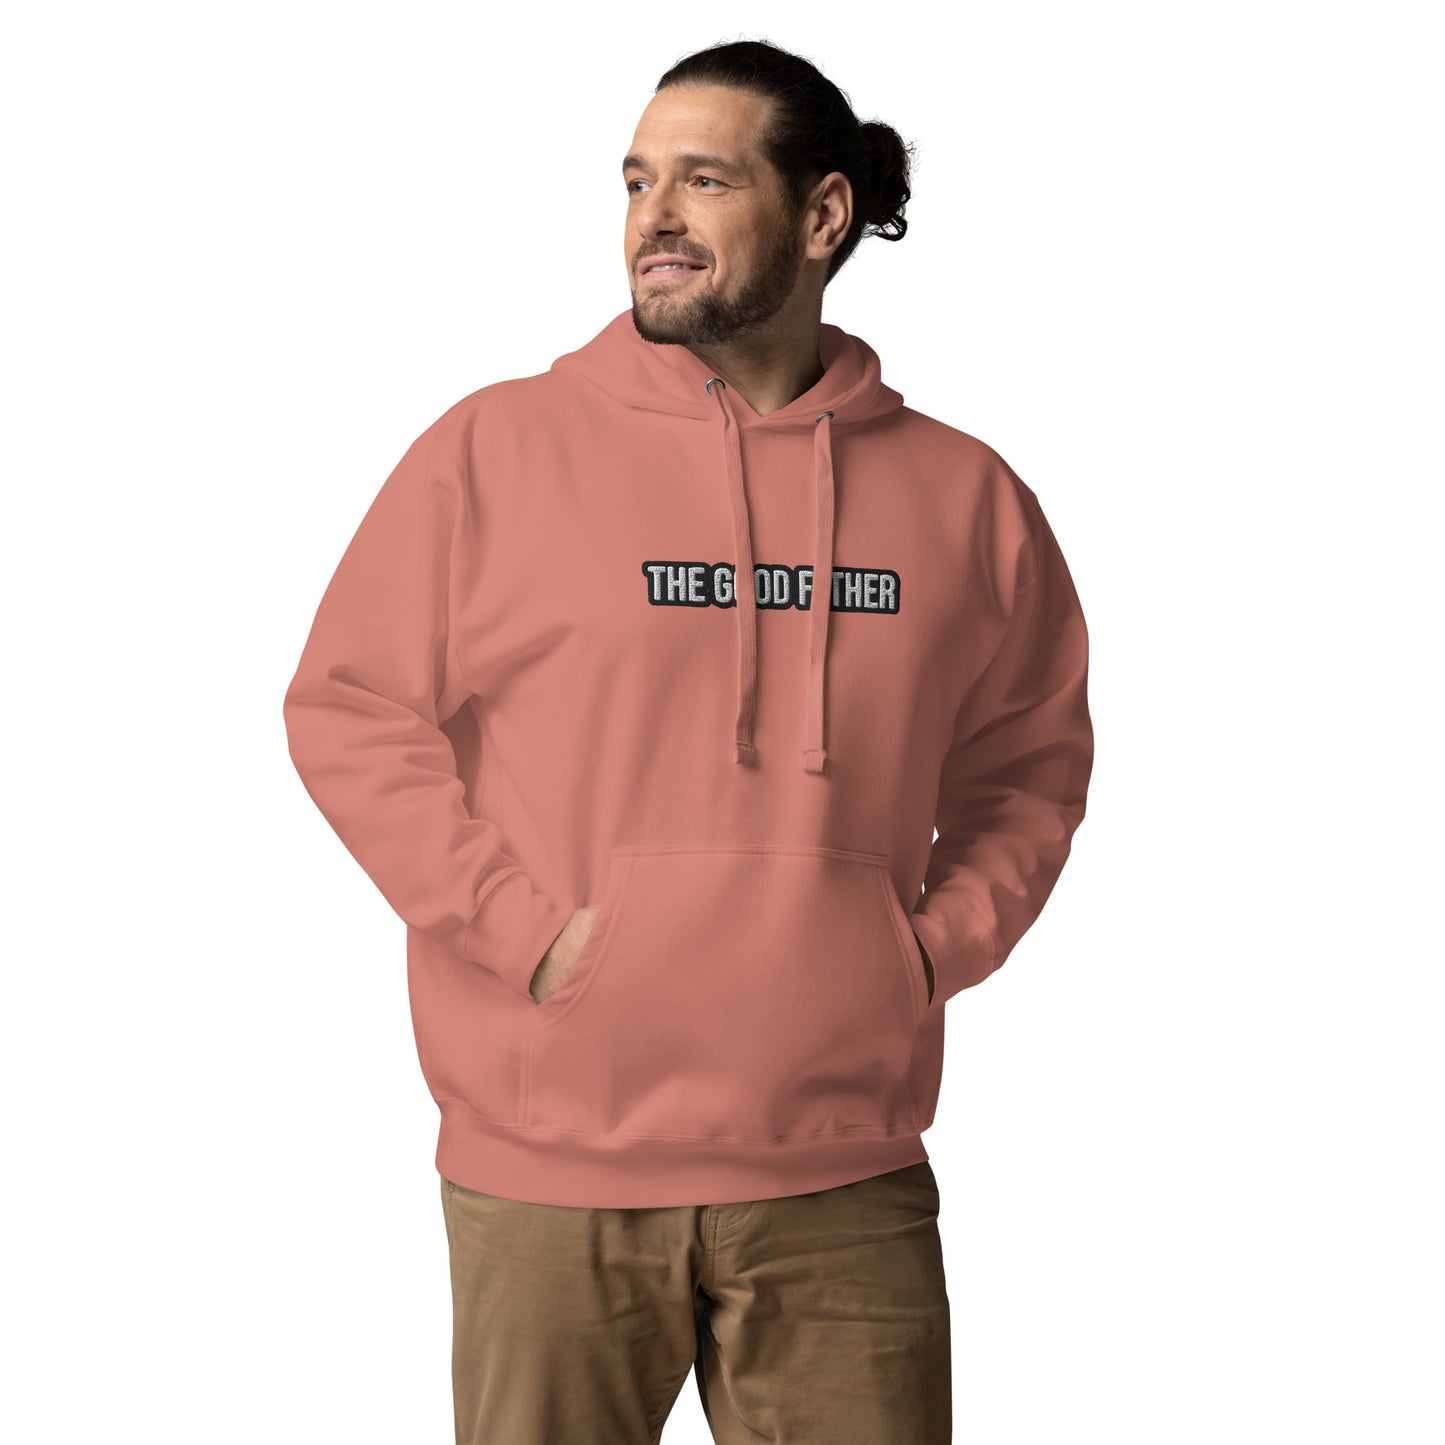 The Good Father Embroidered Hoodie